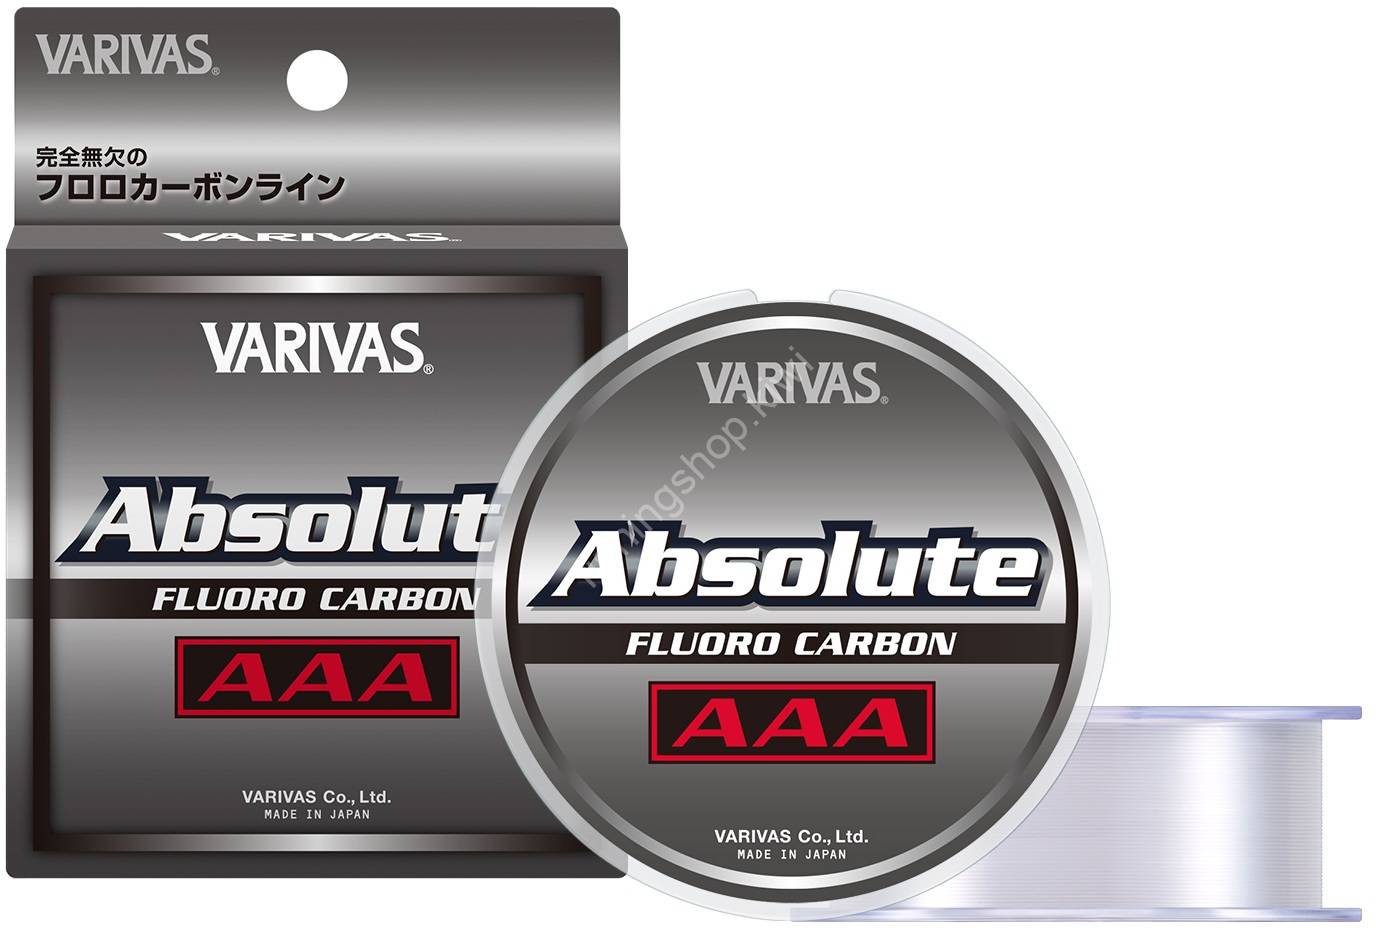 VARIVAS Absolute AAA Fluorocarbon [Natural] 80m #0.165mm (4lb) Fishing  lines buy at